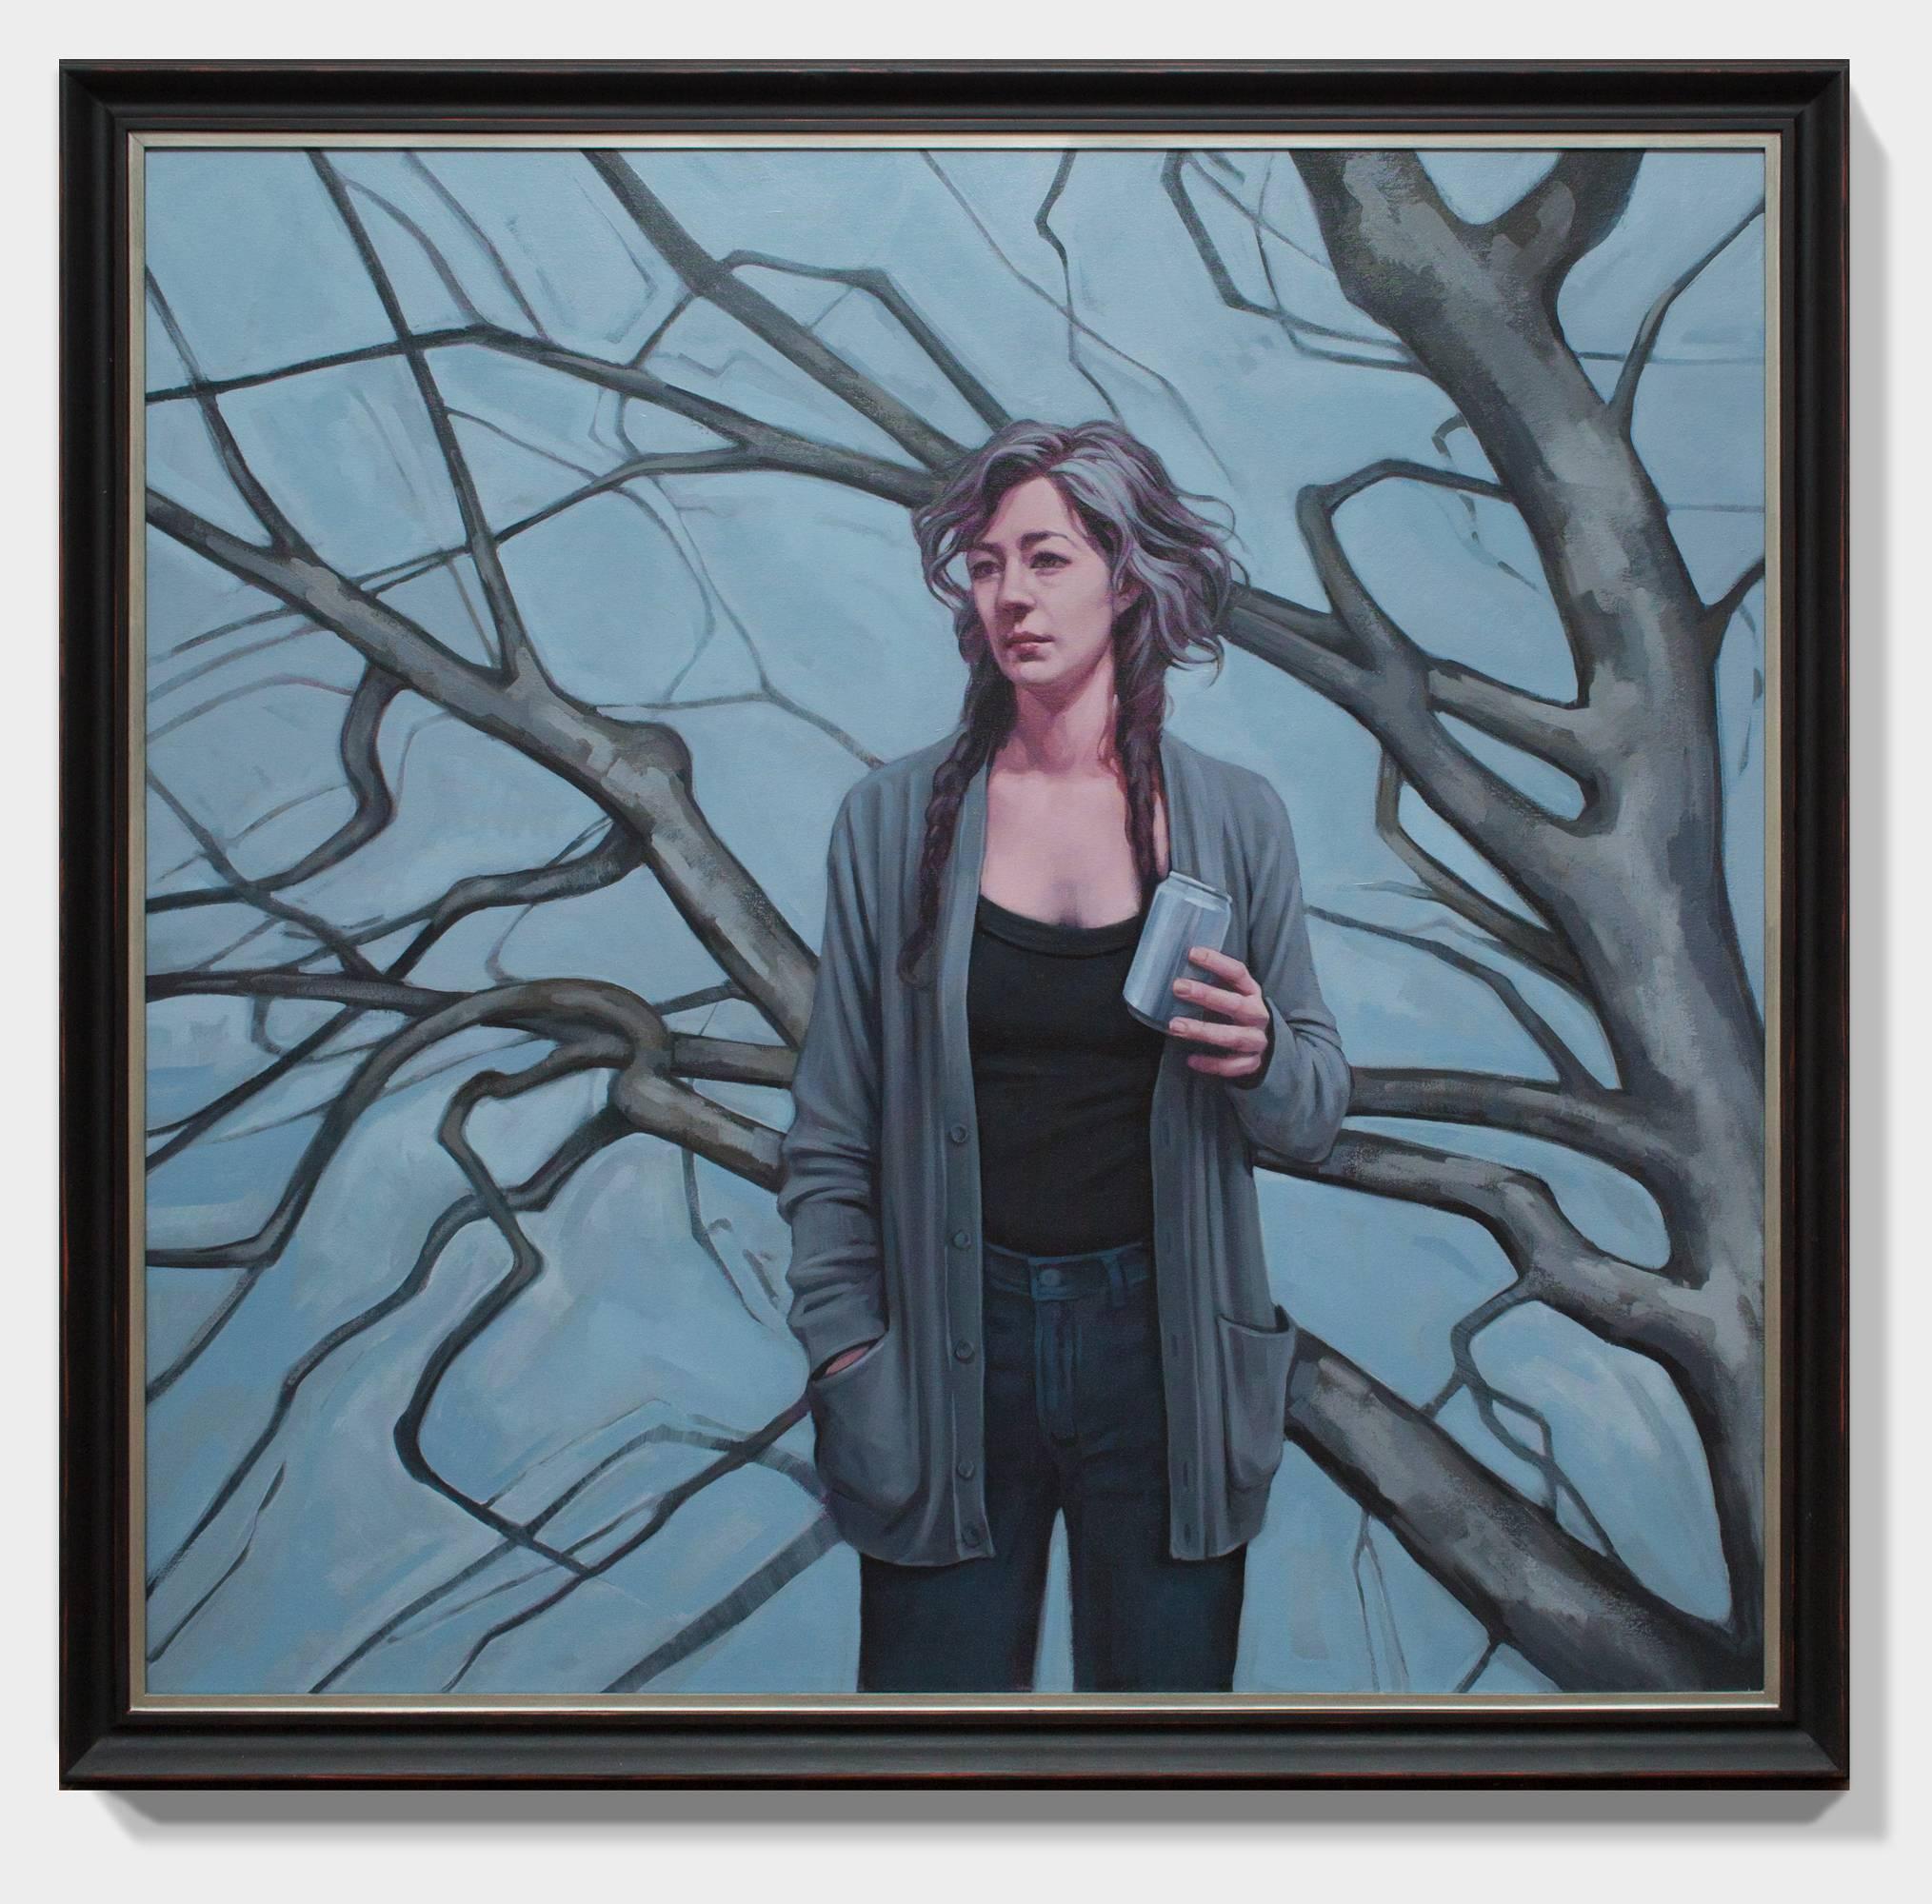 This figurative, blue and grey oil painting